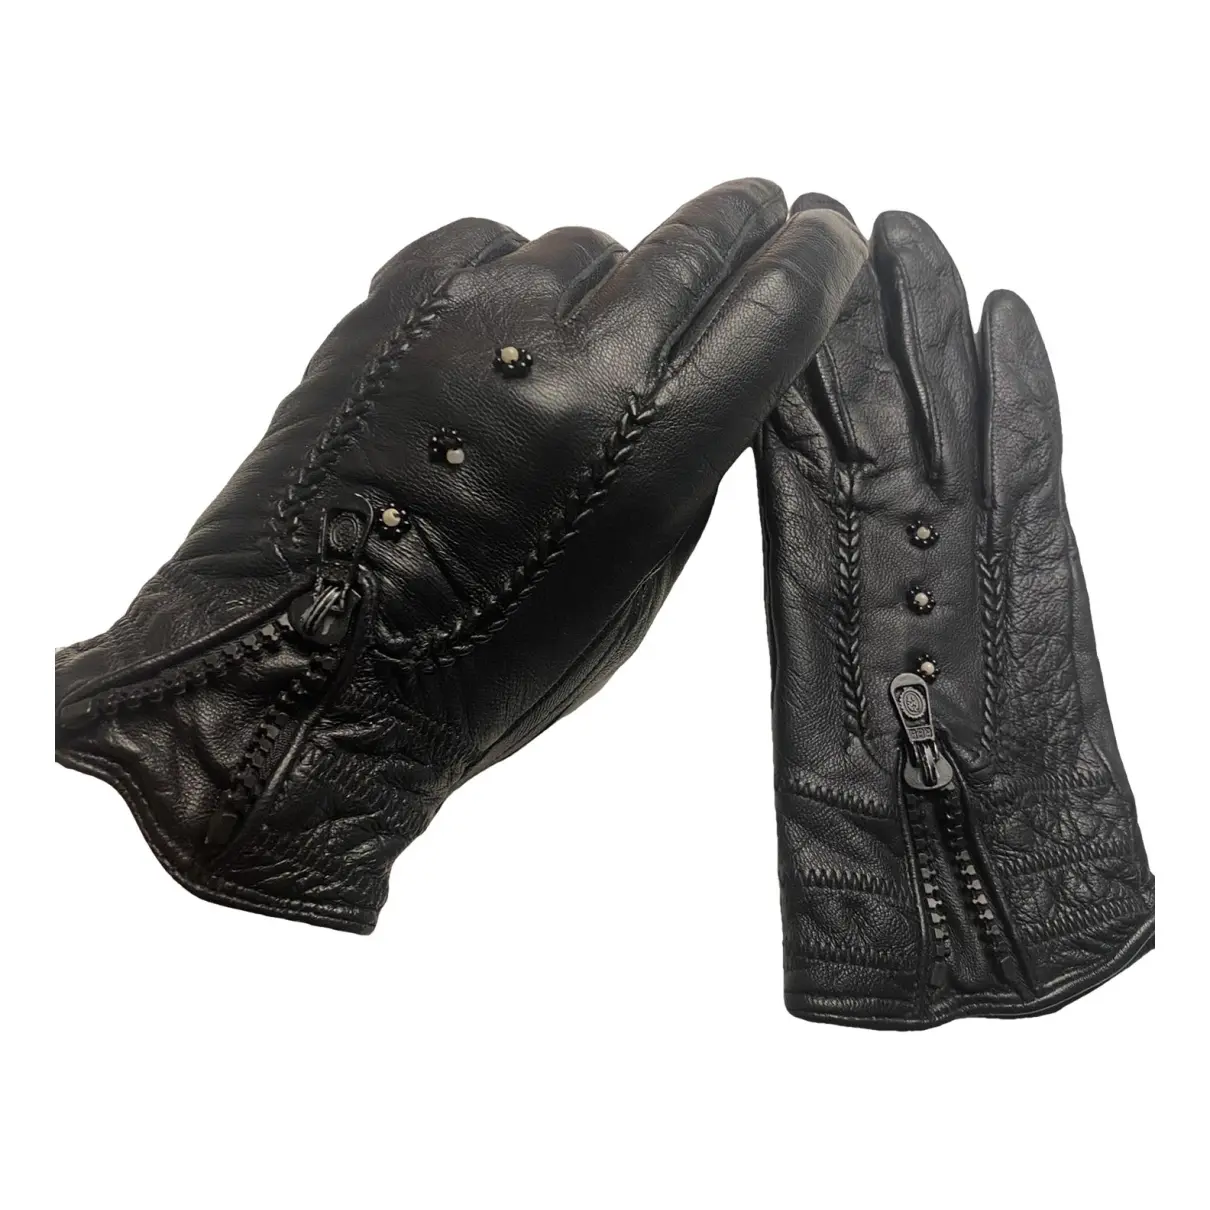 Leather gloves